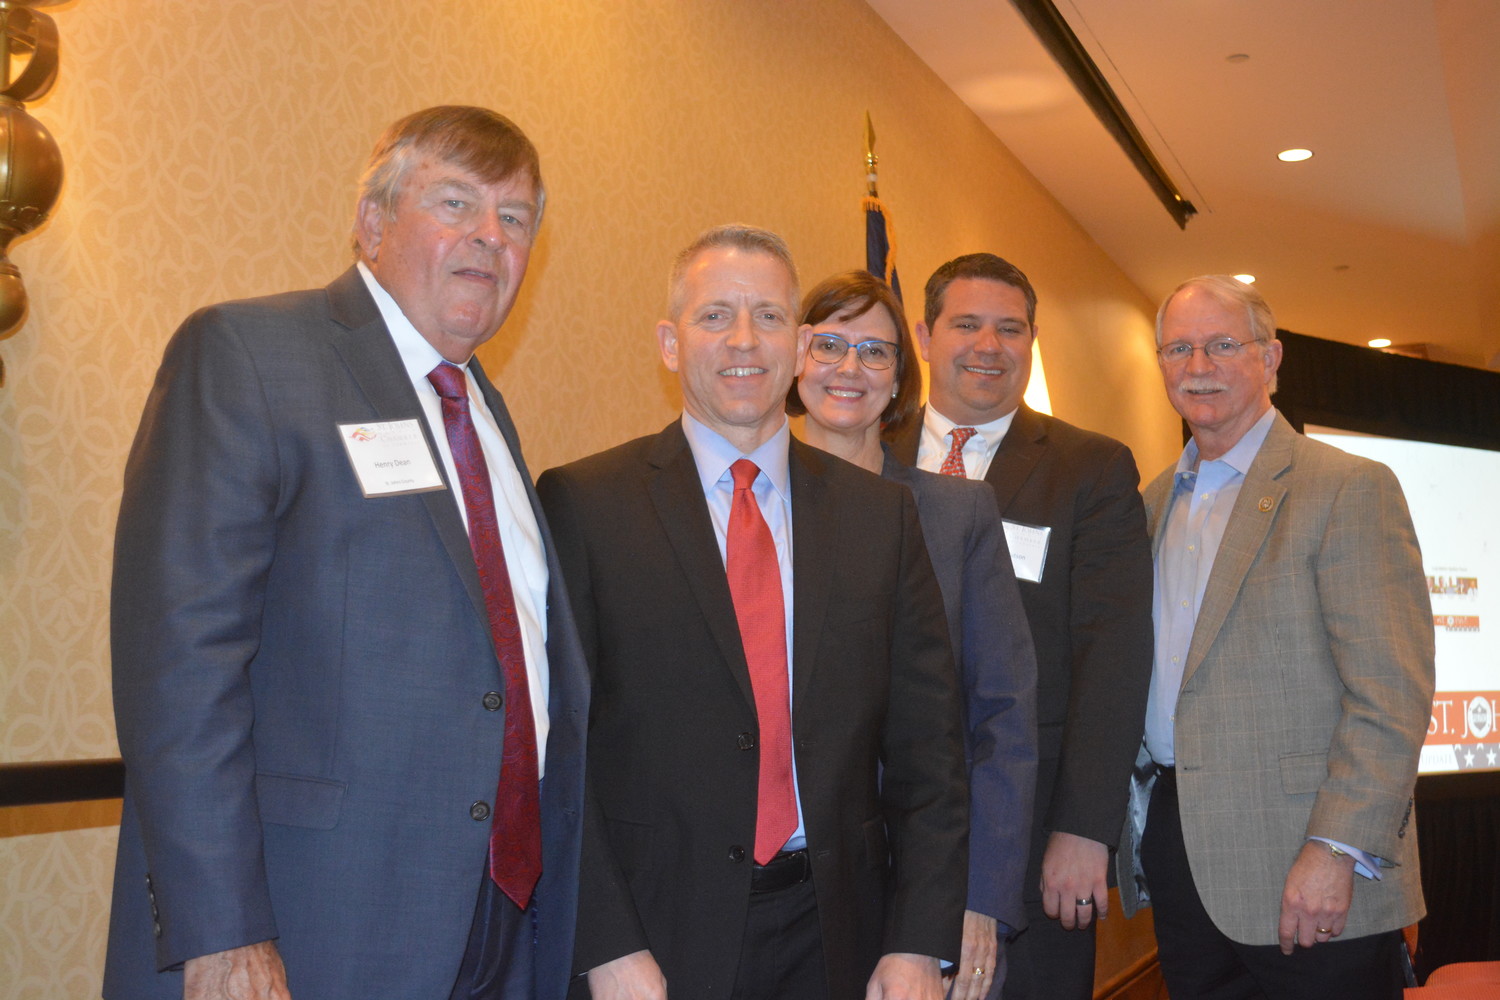 County Commissioner Henry Dean, state Rep. Paul Renner, state Rep. Cyndi Stevenson, state Sen. Travis Hutson and Congressman John Rutherford gather after addressing Chamber of Commerce members March 23 at the Renaissance in World Golf Village.